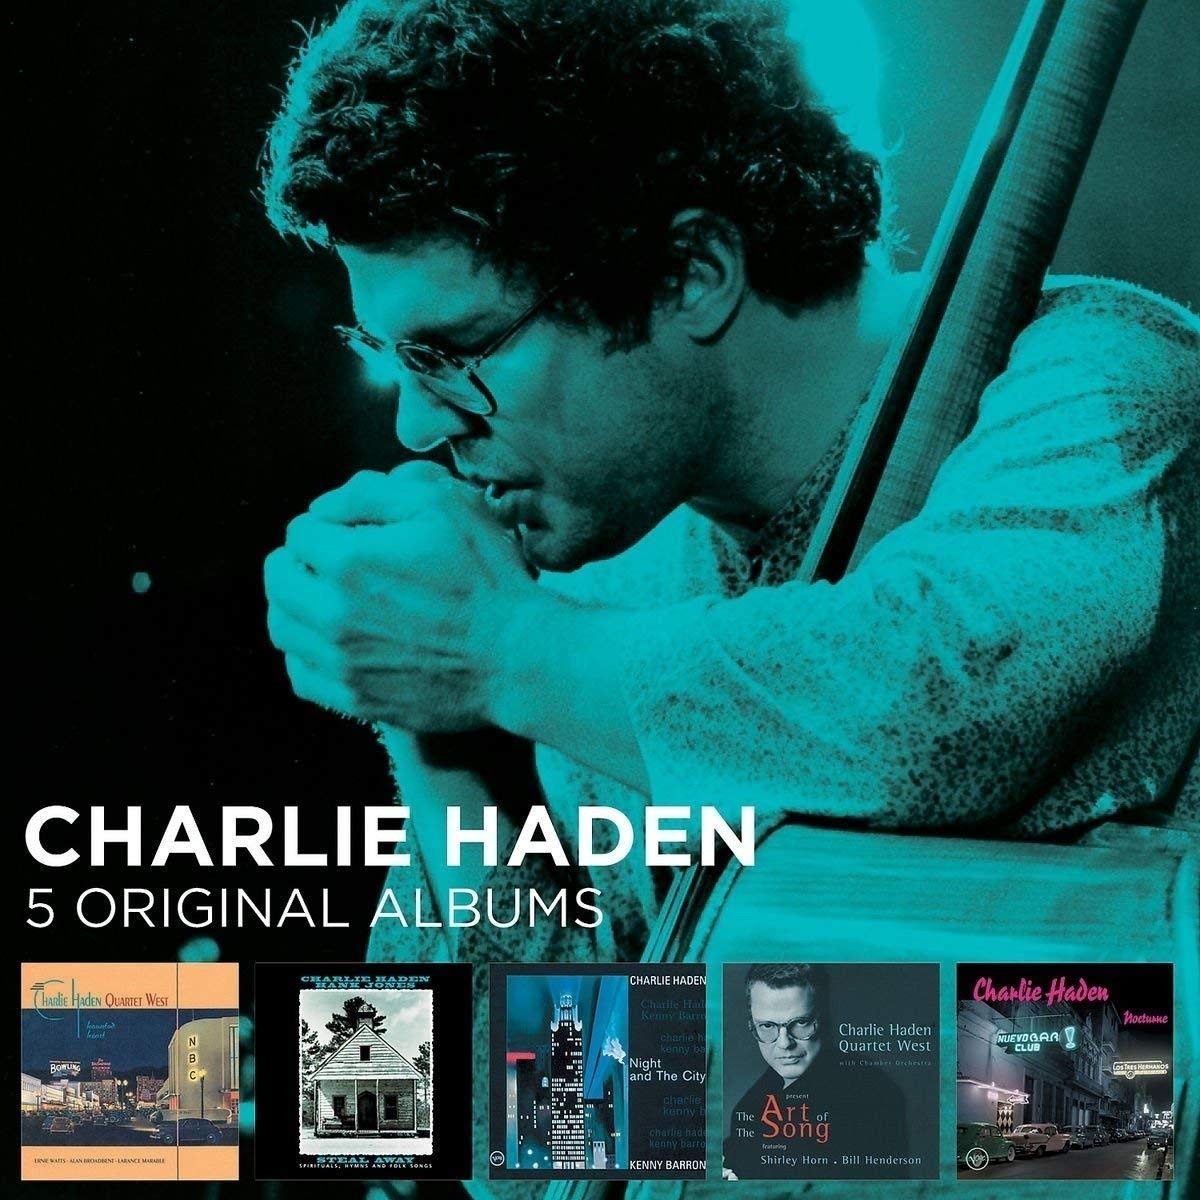 Albums 5. Хэйден. Charlie Haden - the best of Quartet West Charlie Haden & Quartet West. Charlie Haden & Kenny Barron - Night and the City 1998. Charlie Haden on Black Saint & Soul Note 5cd.